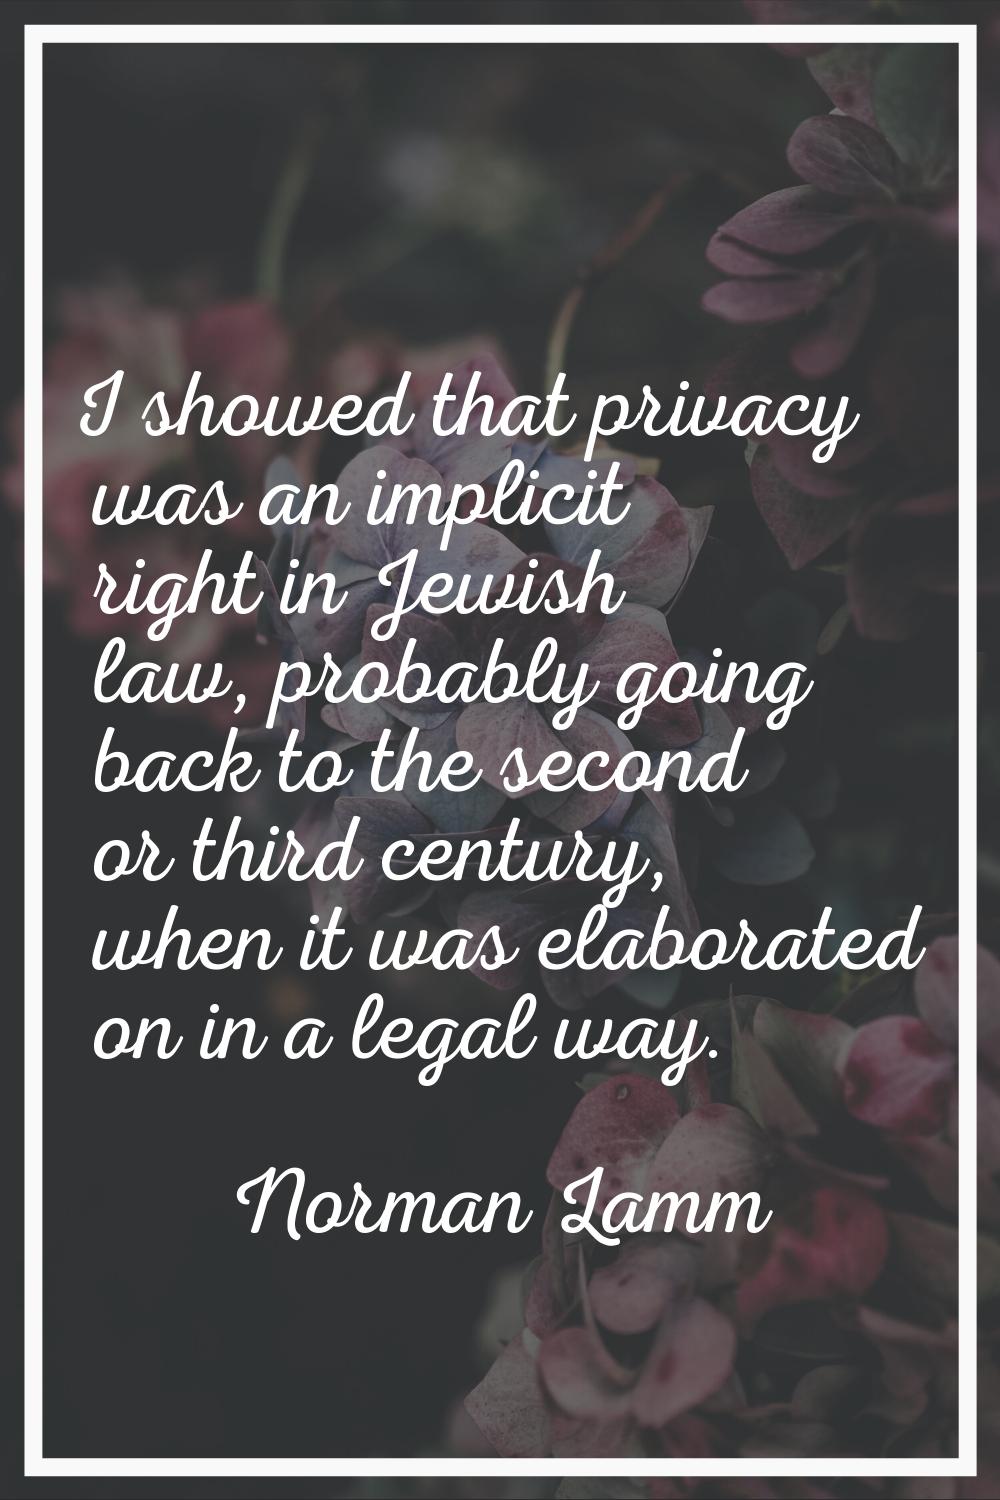 I showed that privacy was an implicit right in Jewish law, probably going back to the second or thi